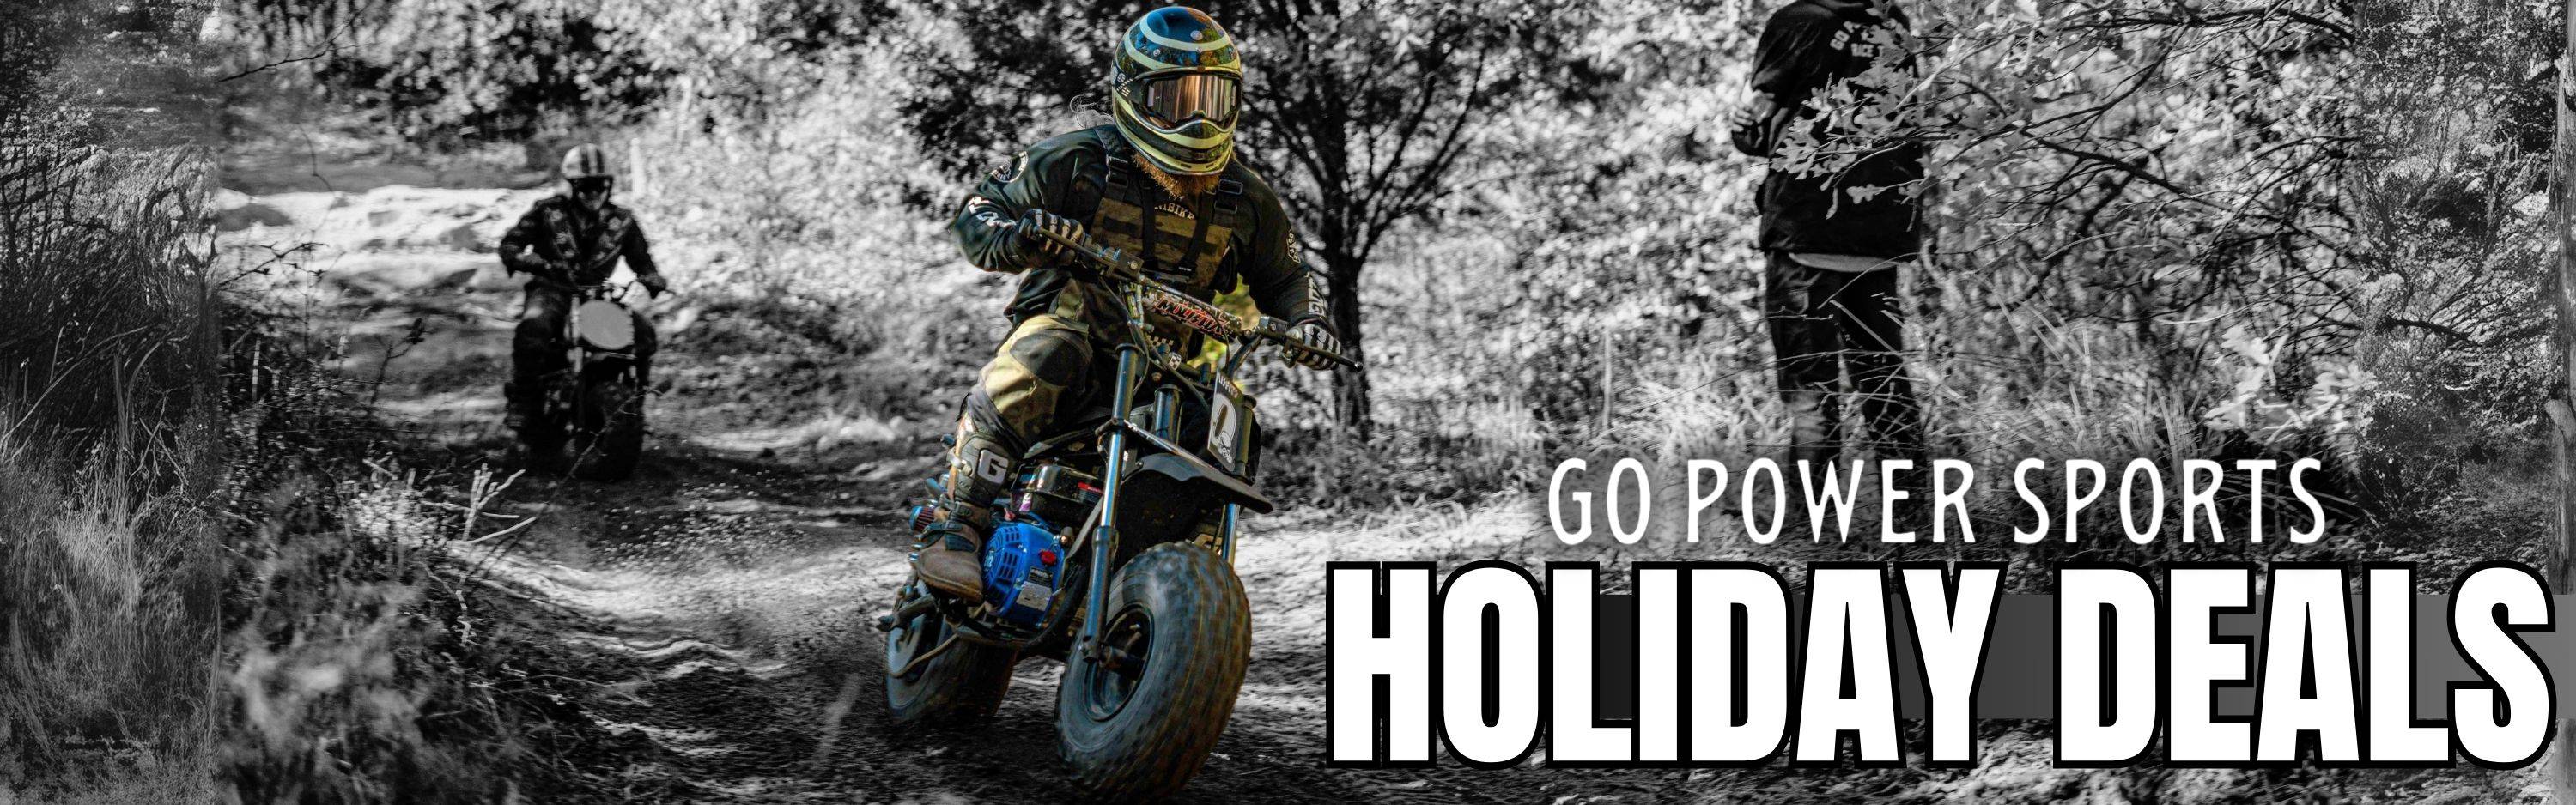 Shop GoPowerSports Holiday Deals on mini bikes and go kart parts.